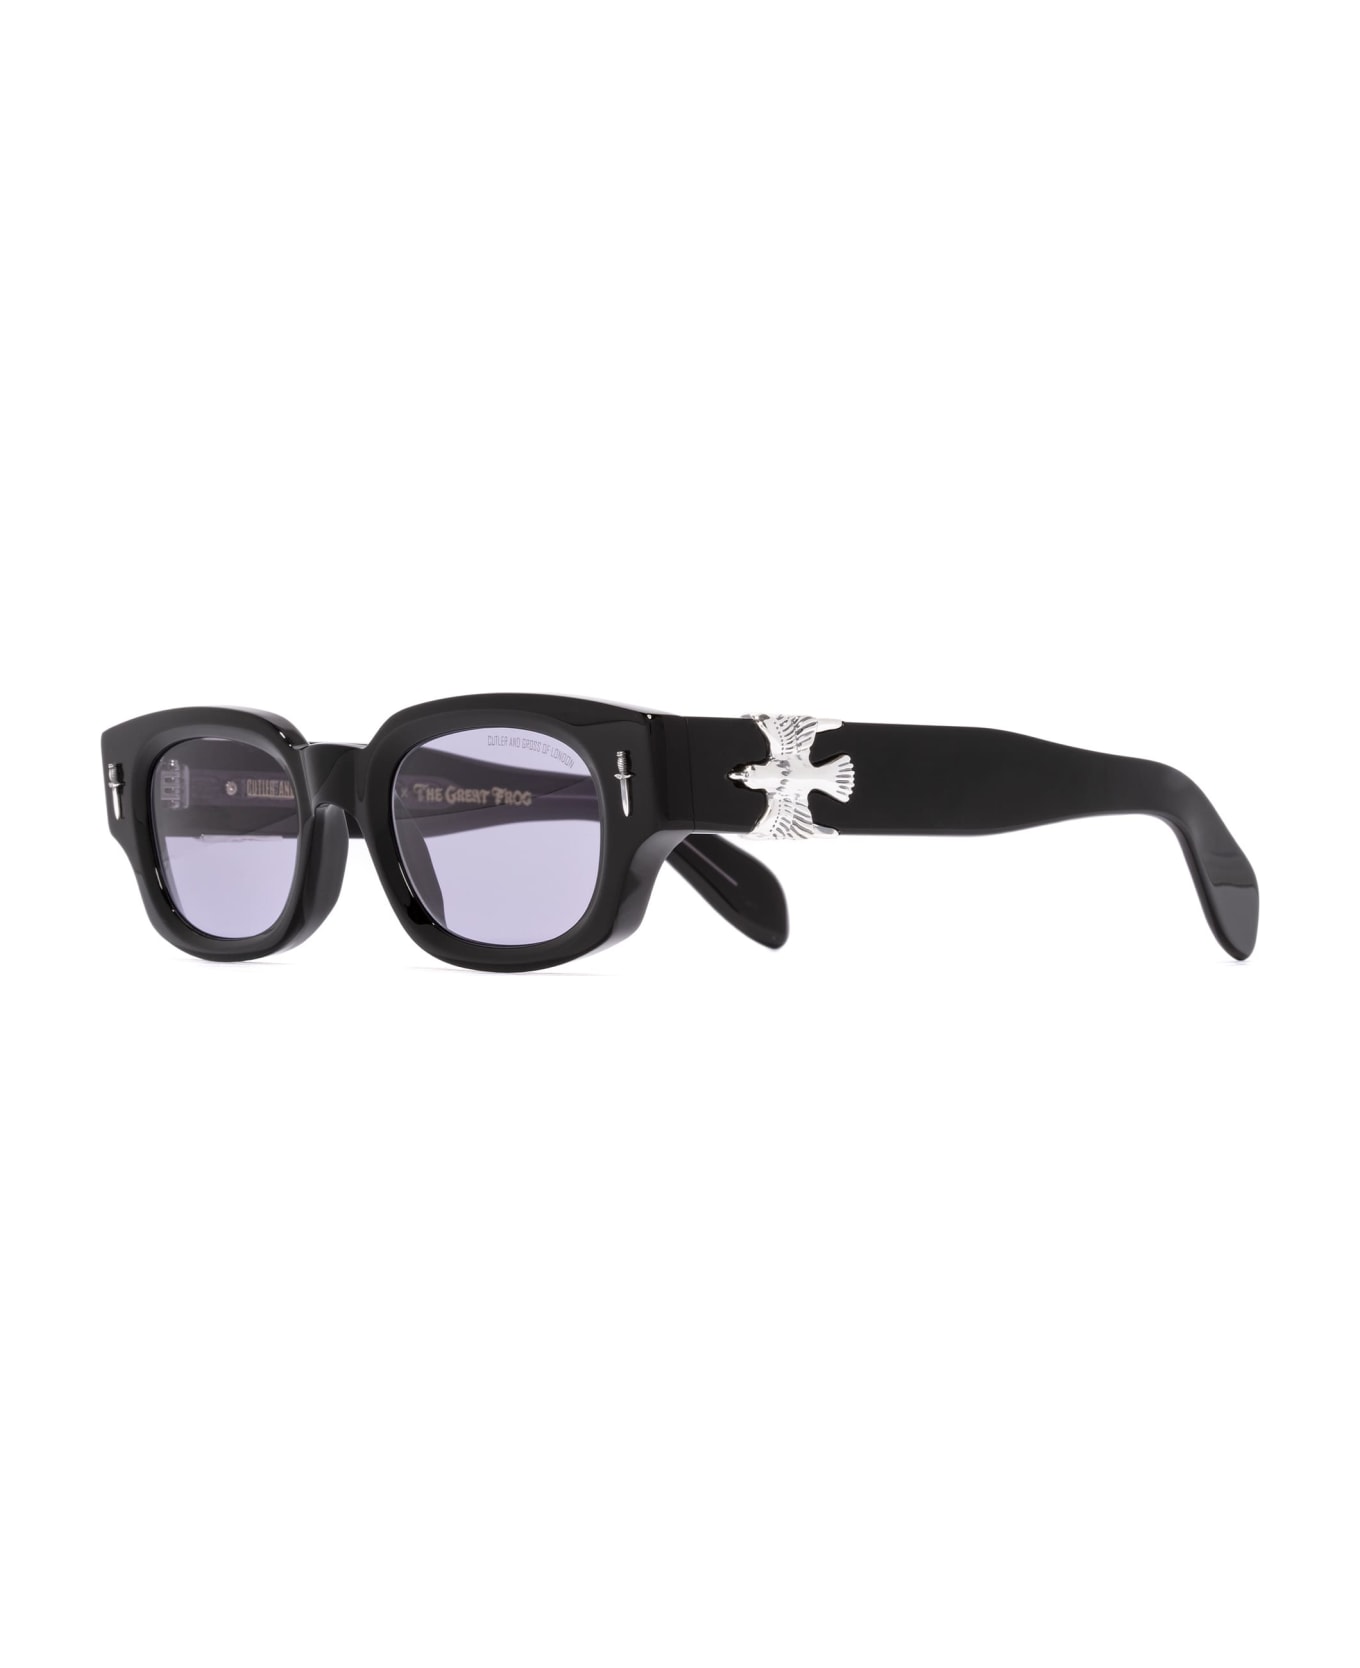 Cutler and Gross The Great Frog - Soaring Eagle / Black Sunglasses - Black